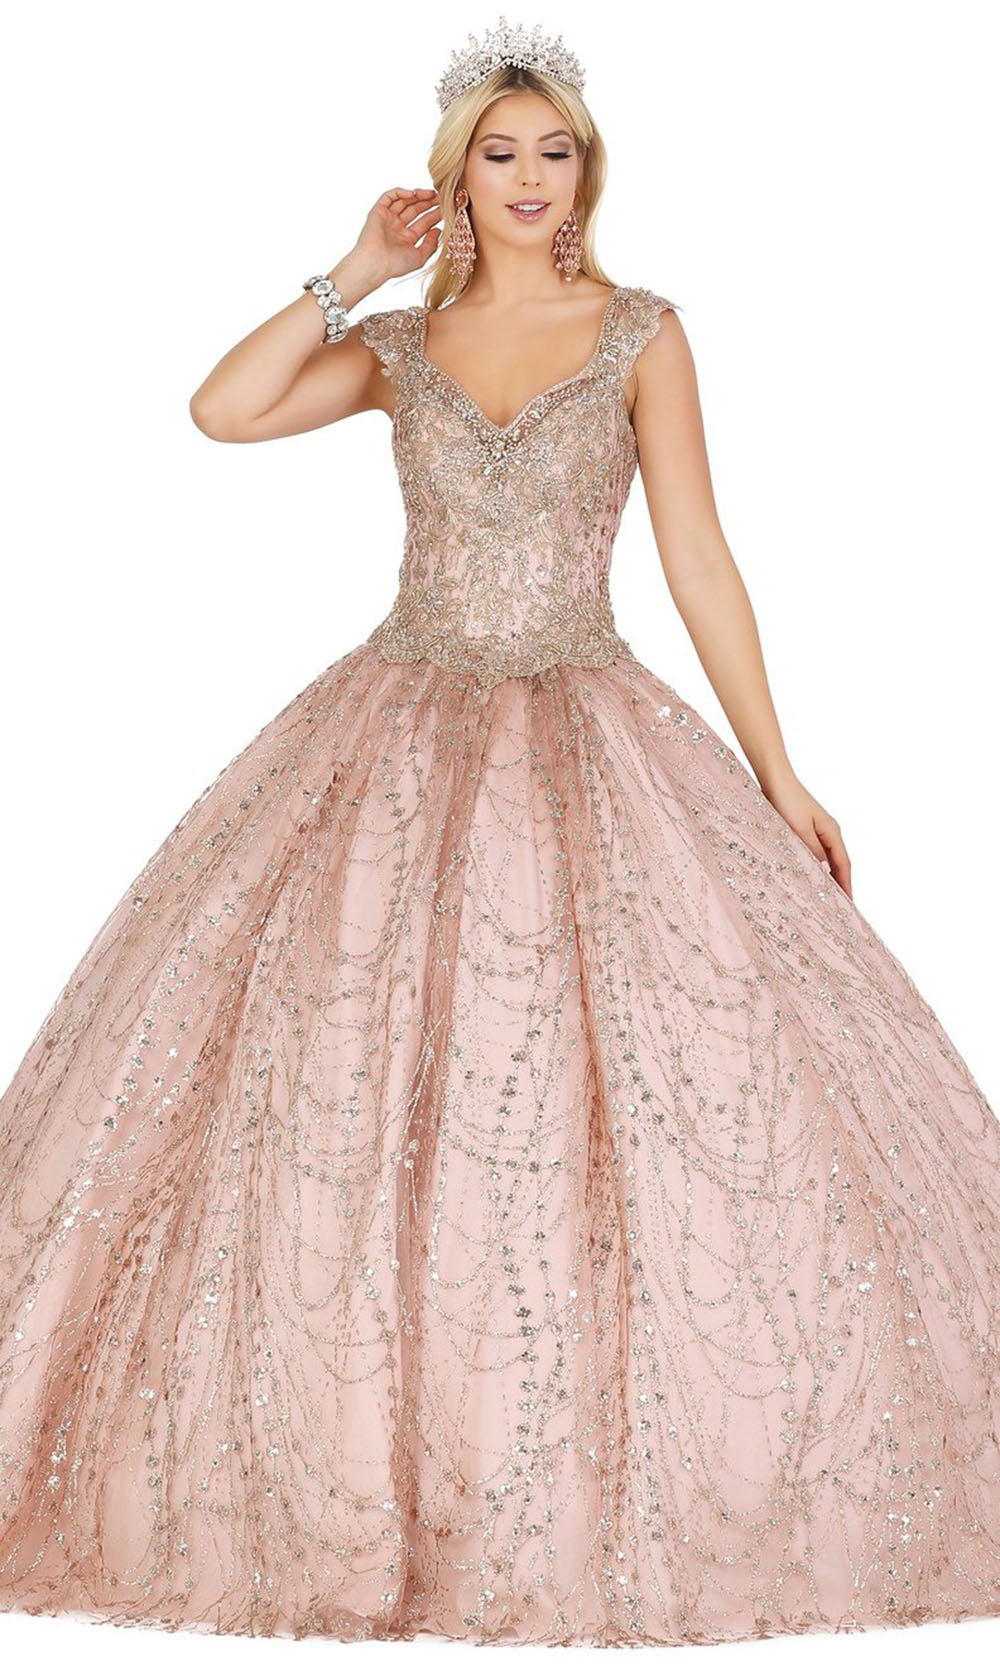 Dancing Queen - 1396 Scallop Trimmed Glitter Print Ballgown In Champagne & Gold